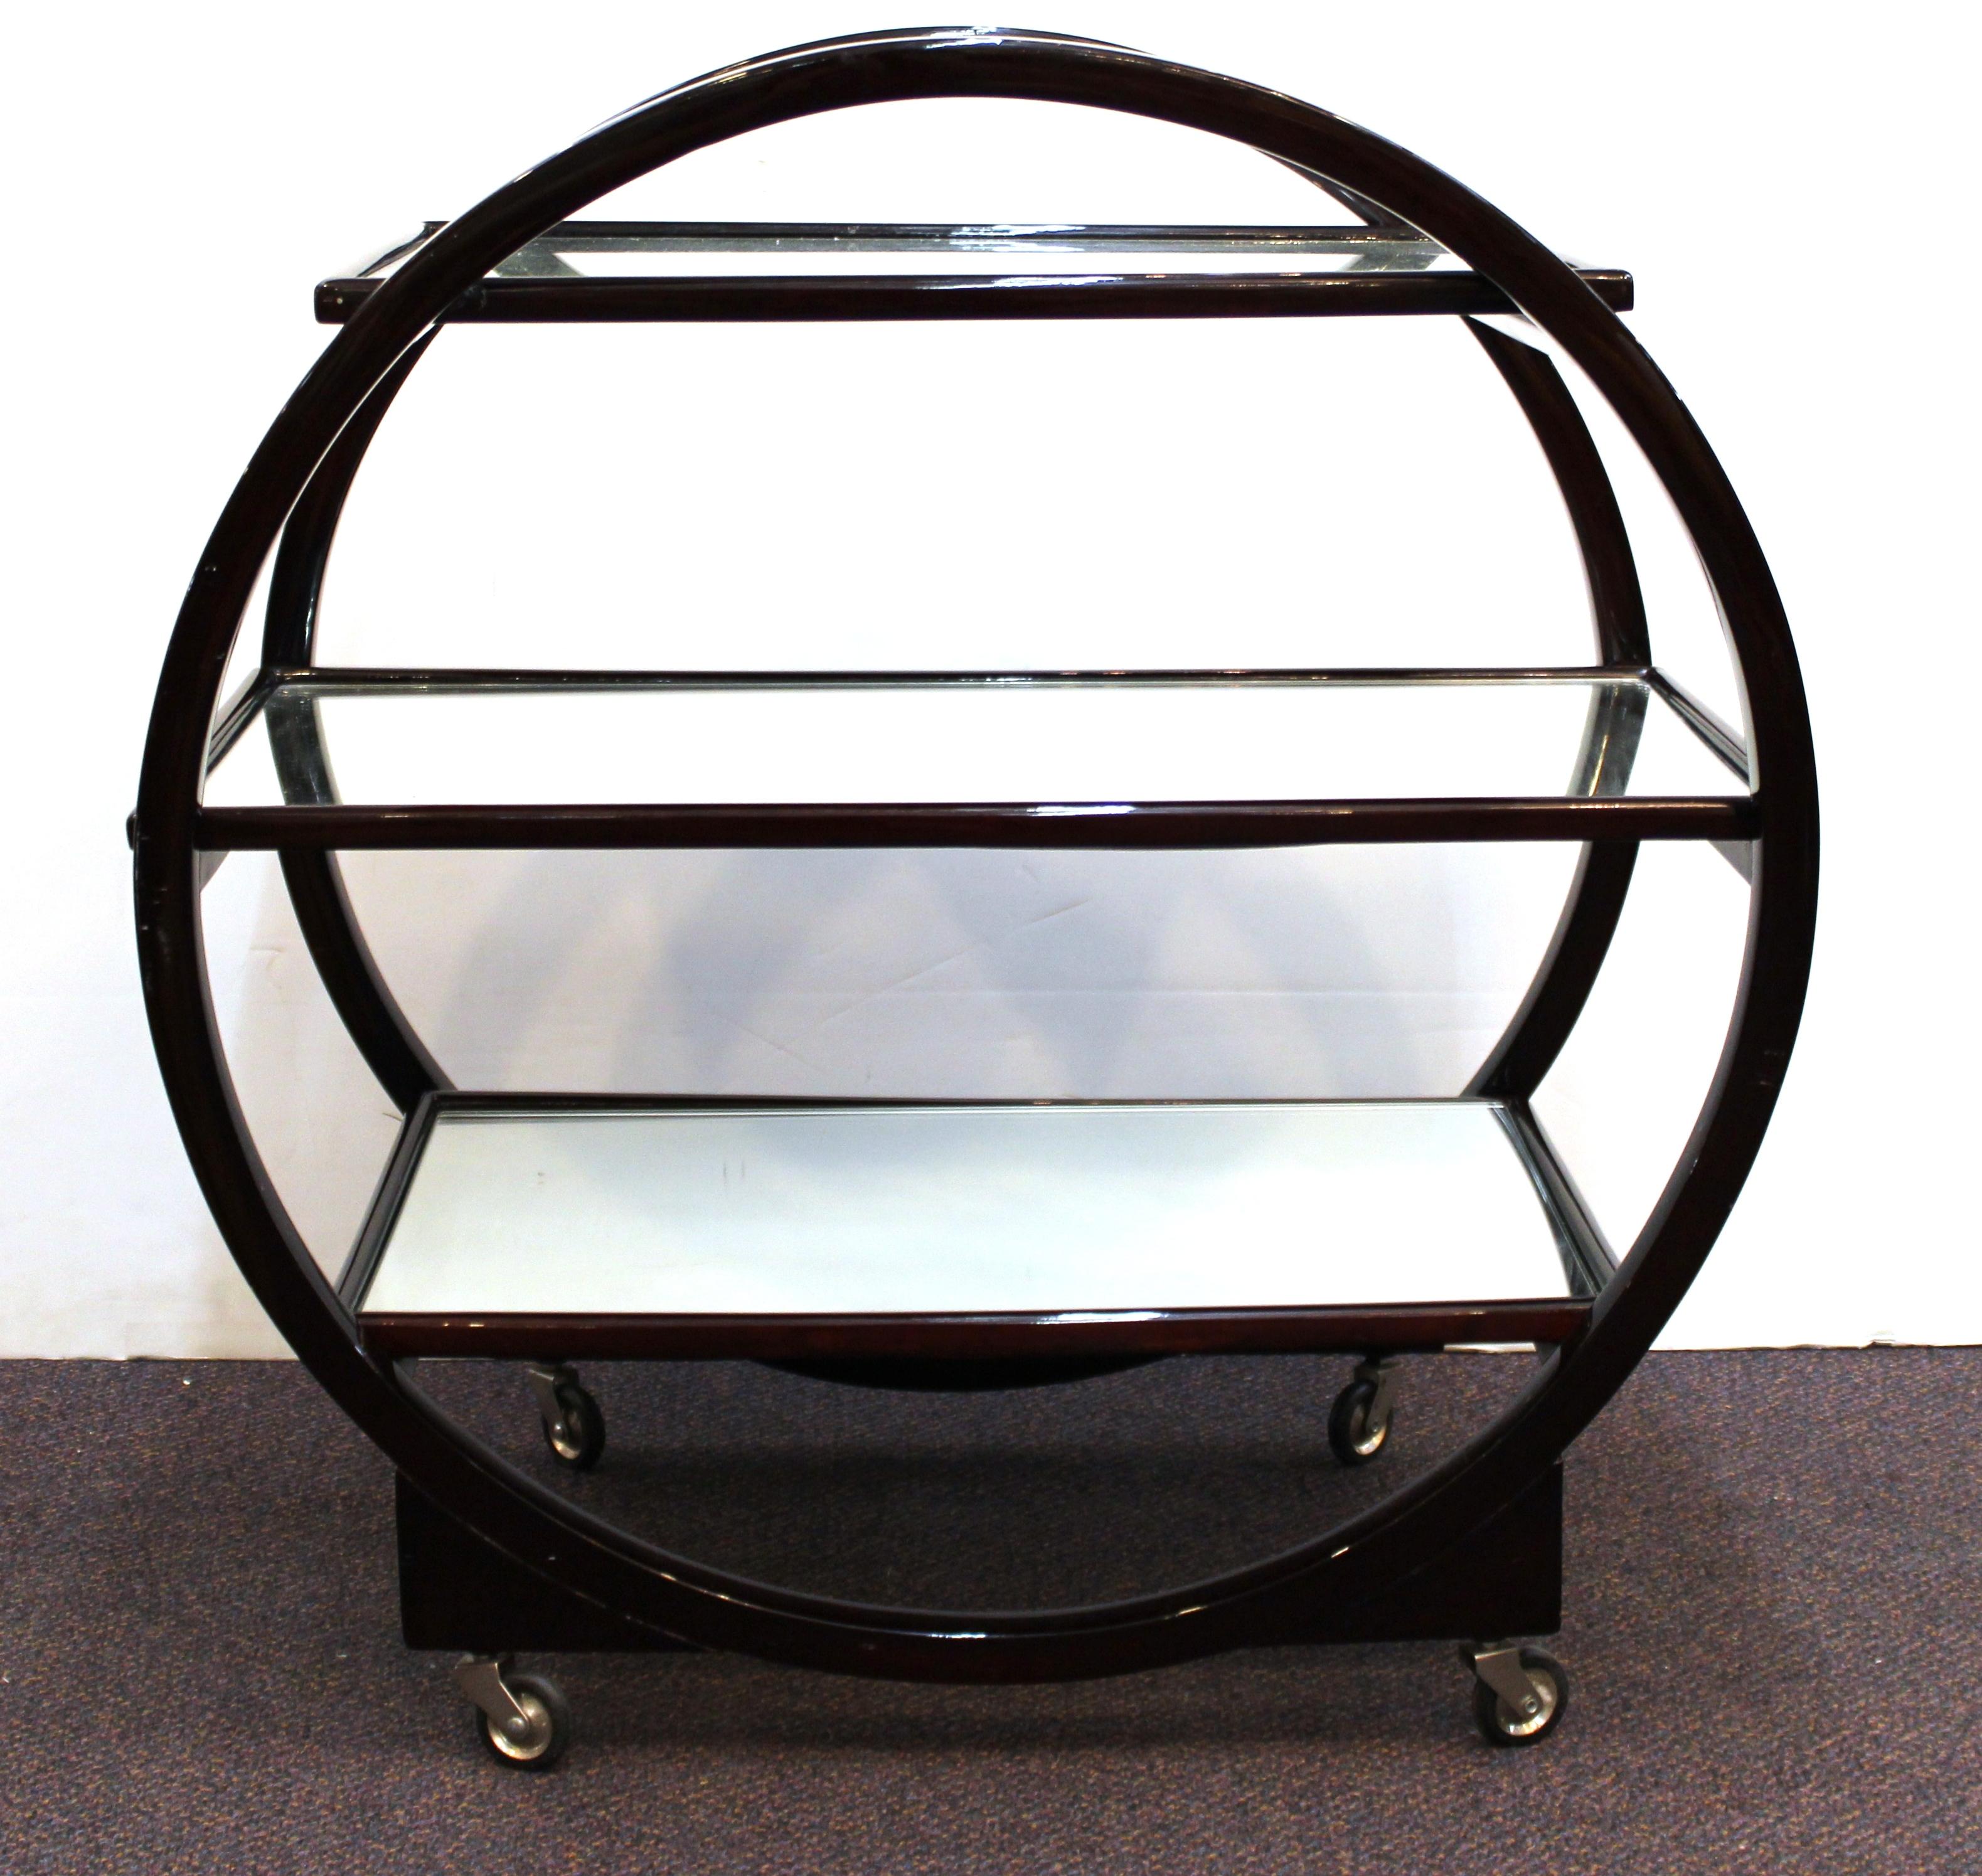 Art Deco bar cart or serving cart with three levels of mirrored shelving set within a circular wooden framework on casters. The piece was made in England during the 1930s and is in great vintage condition, with some age-appropriate wear to the